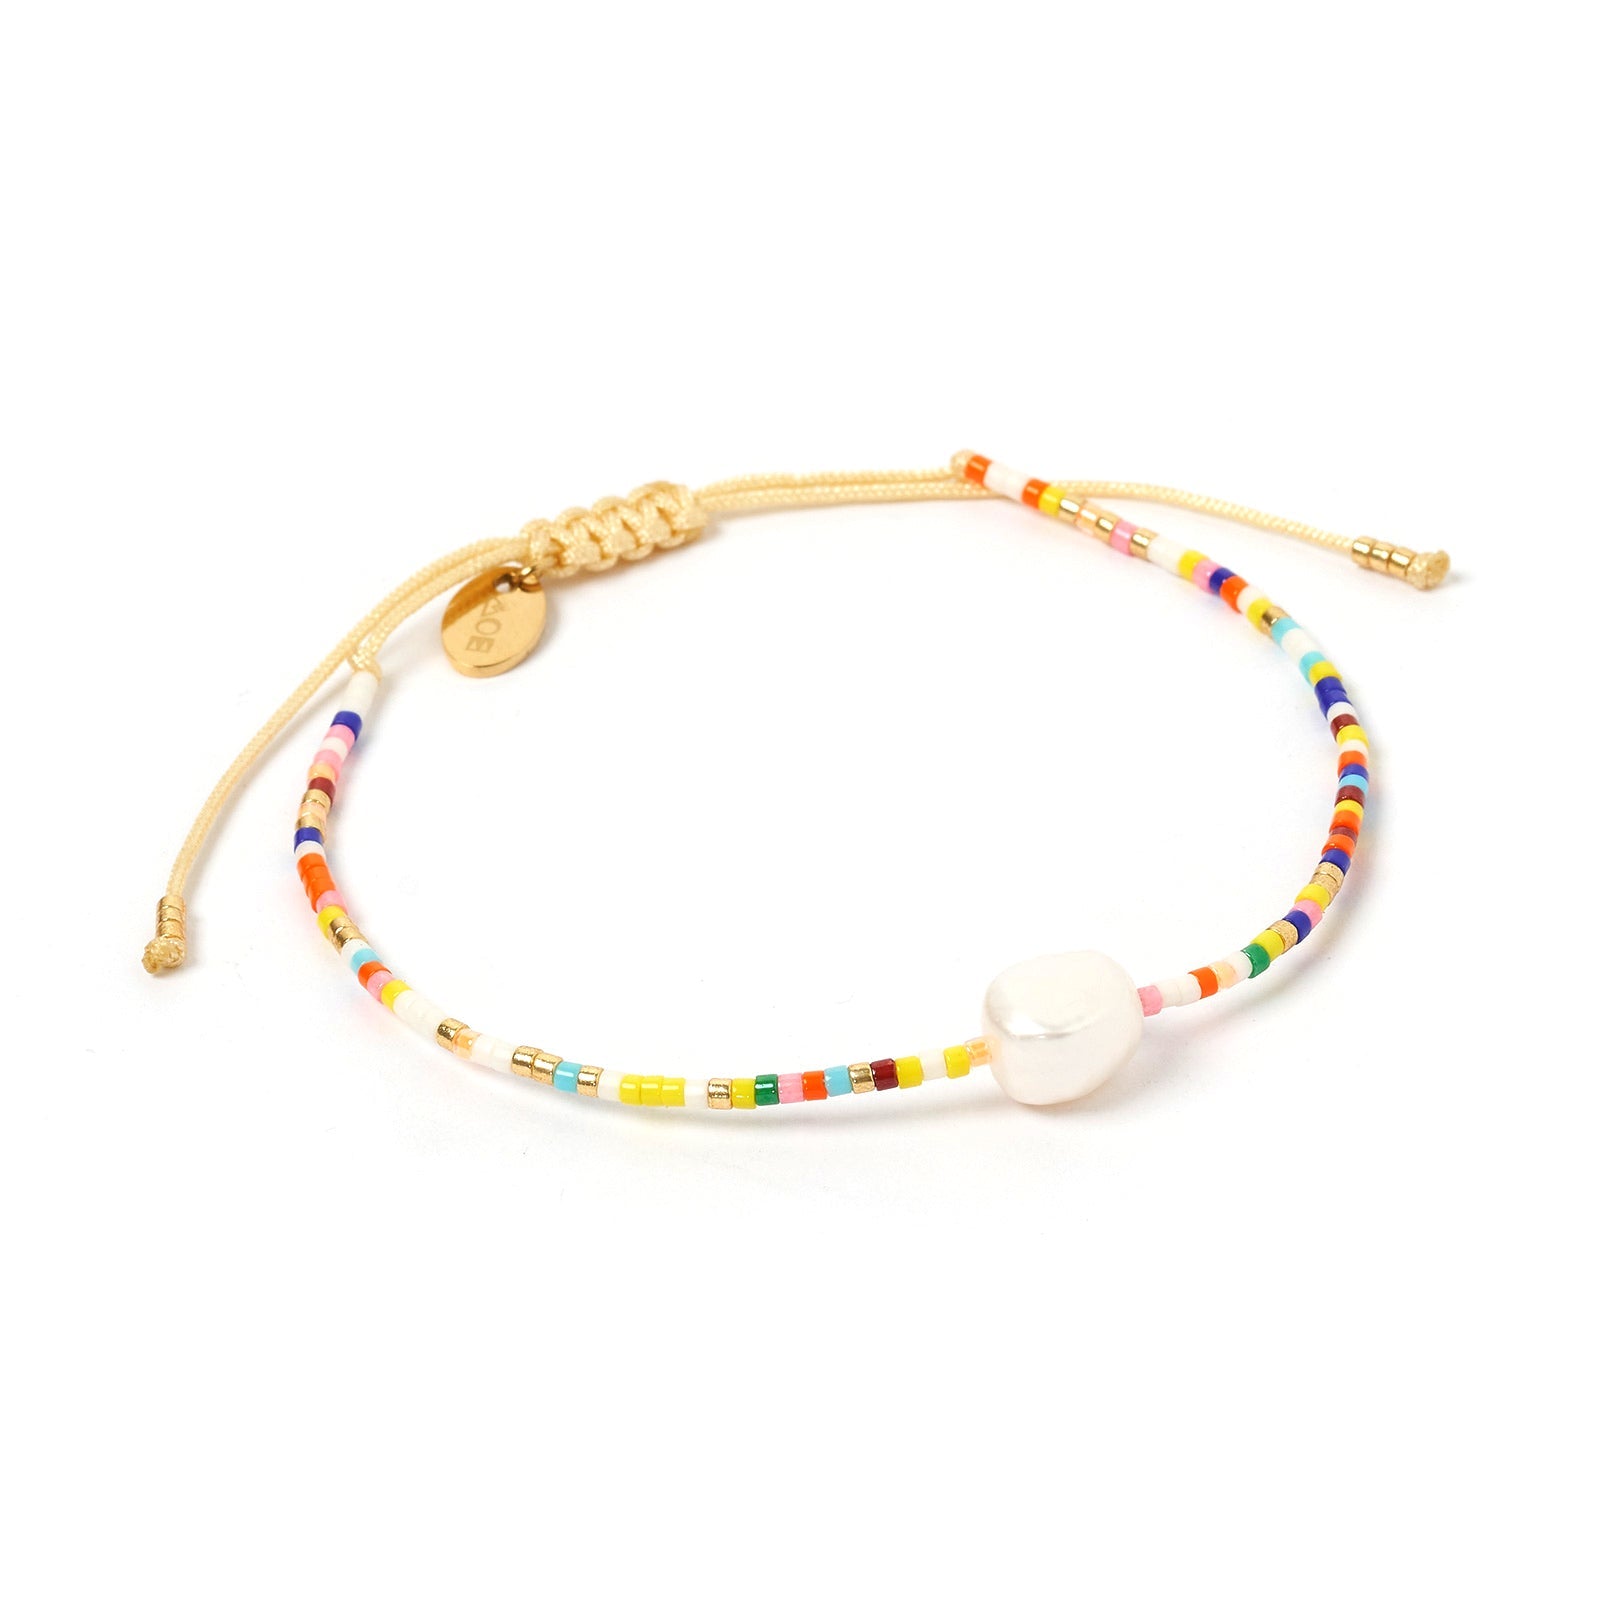 Arms of Eve Marley Gold and Pearl Bracelet